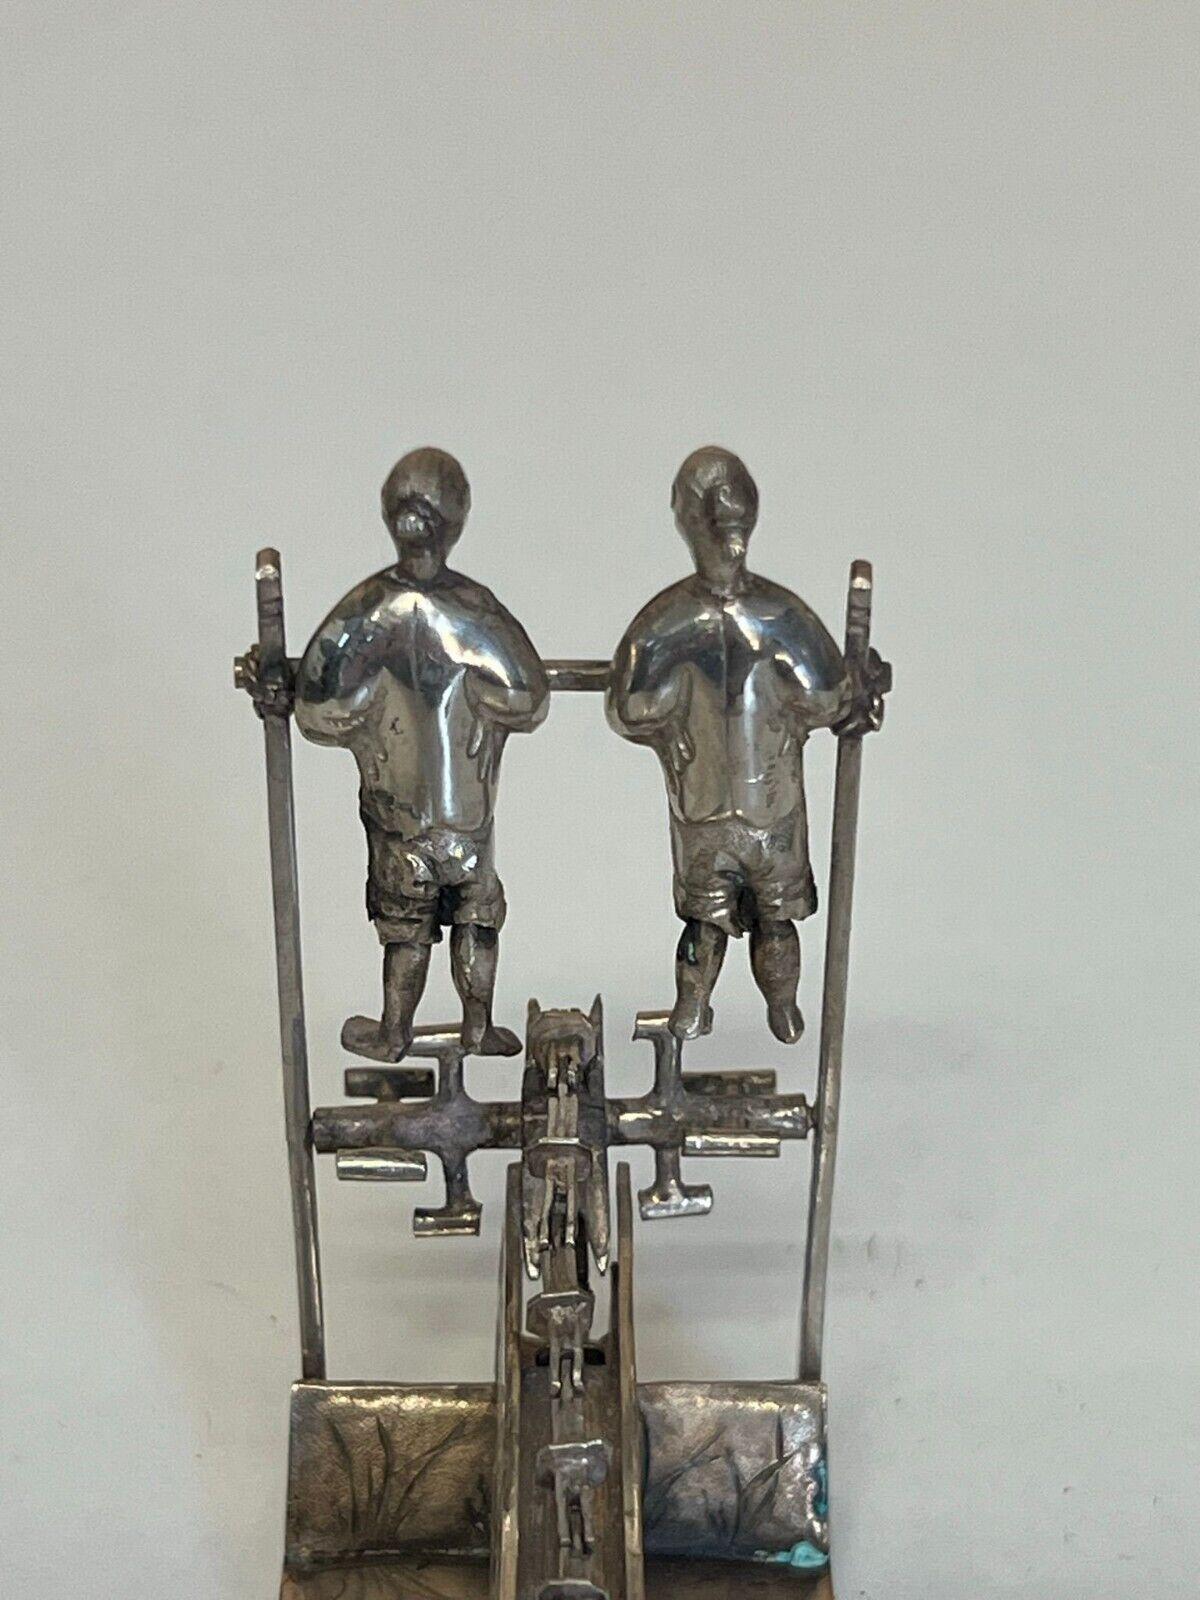 ANTIQUE CIRCA 1890 CHINESE STERLiNG SILVER STATUE OF MEN PEDDLING WITH A CHAIN For Sale 5